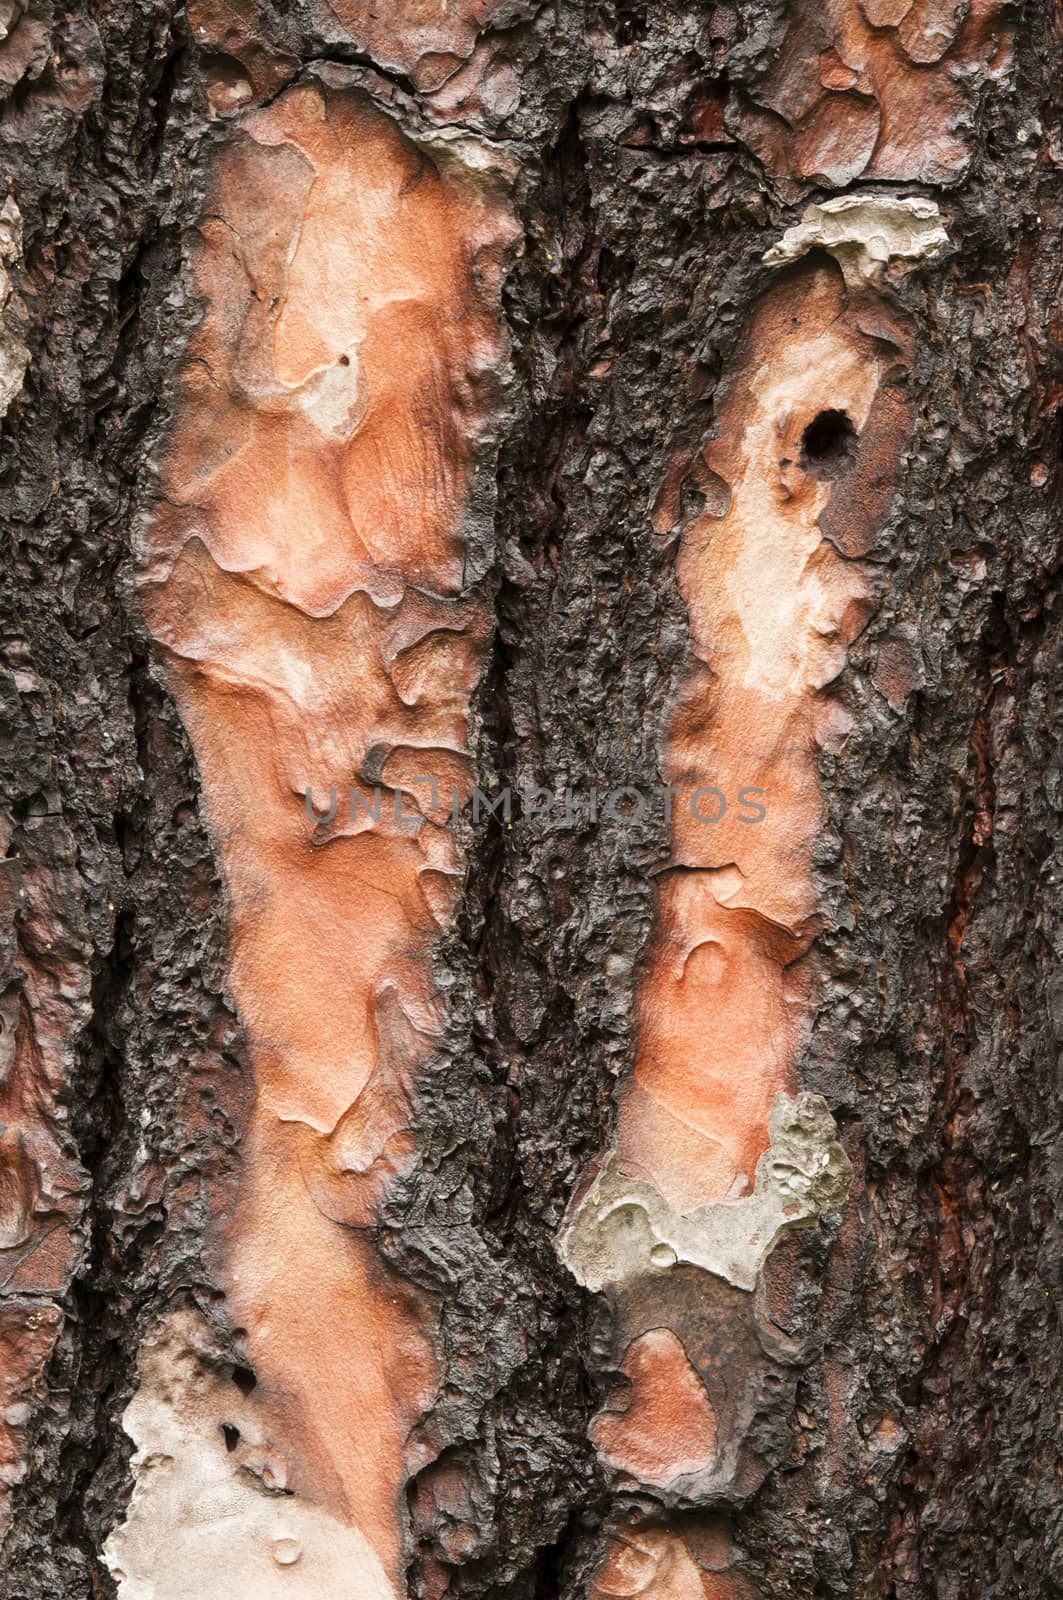  bark of pinus canariensis by AlessandroZocc